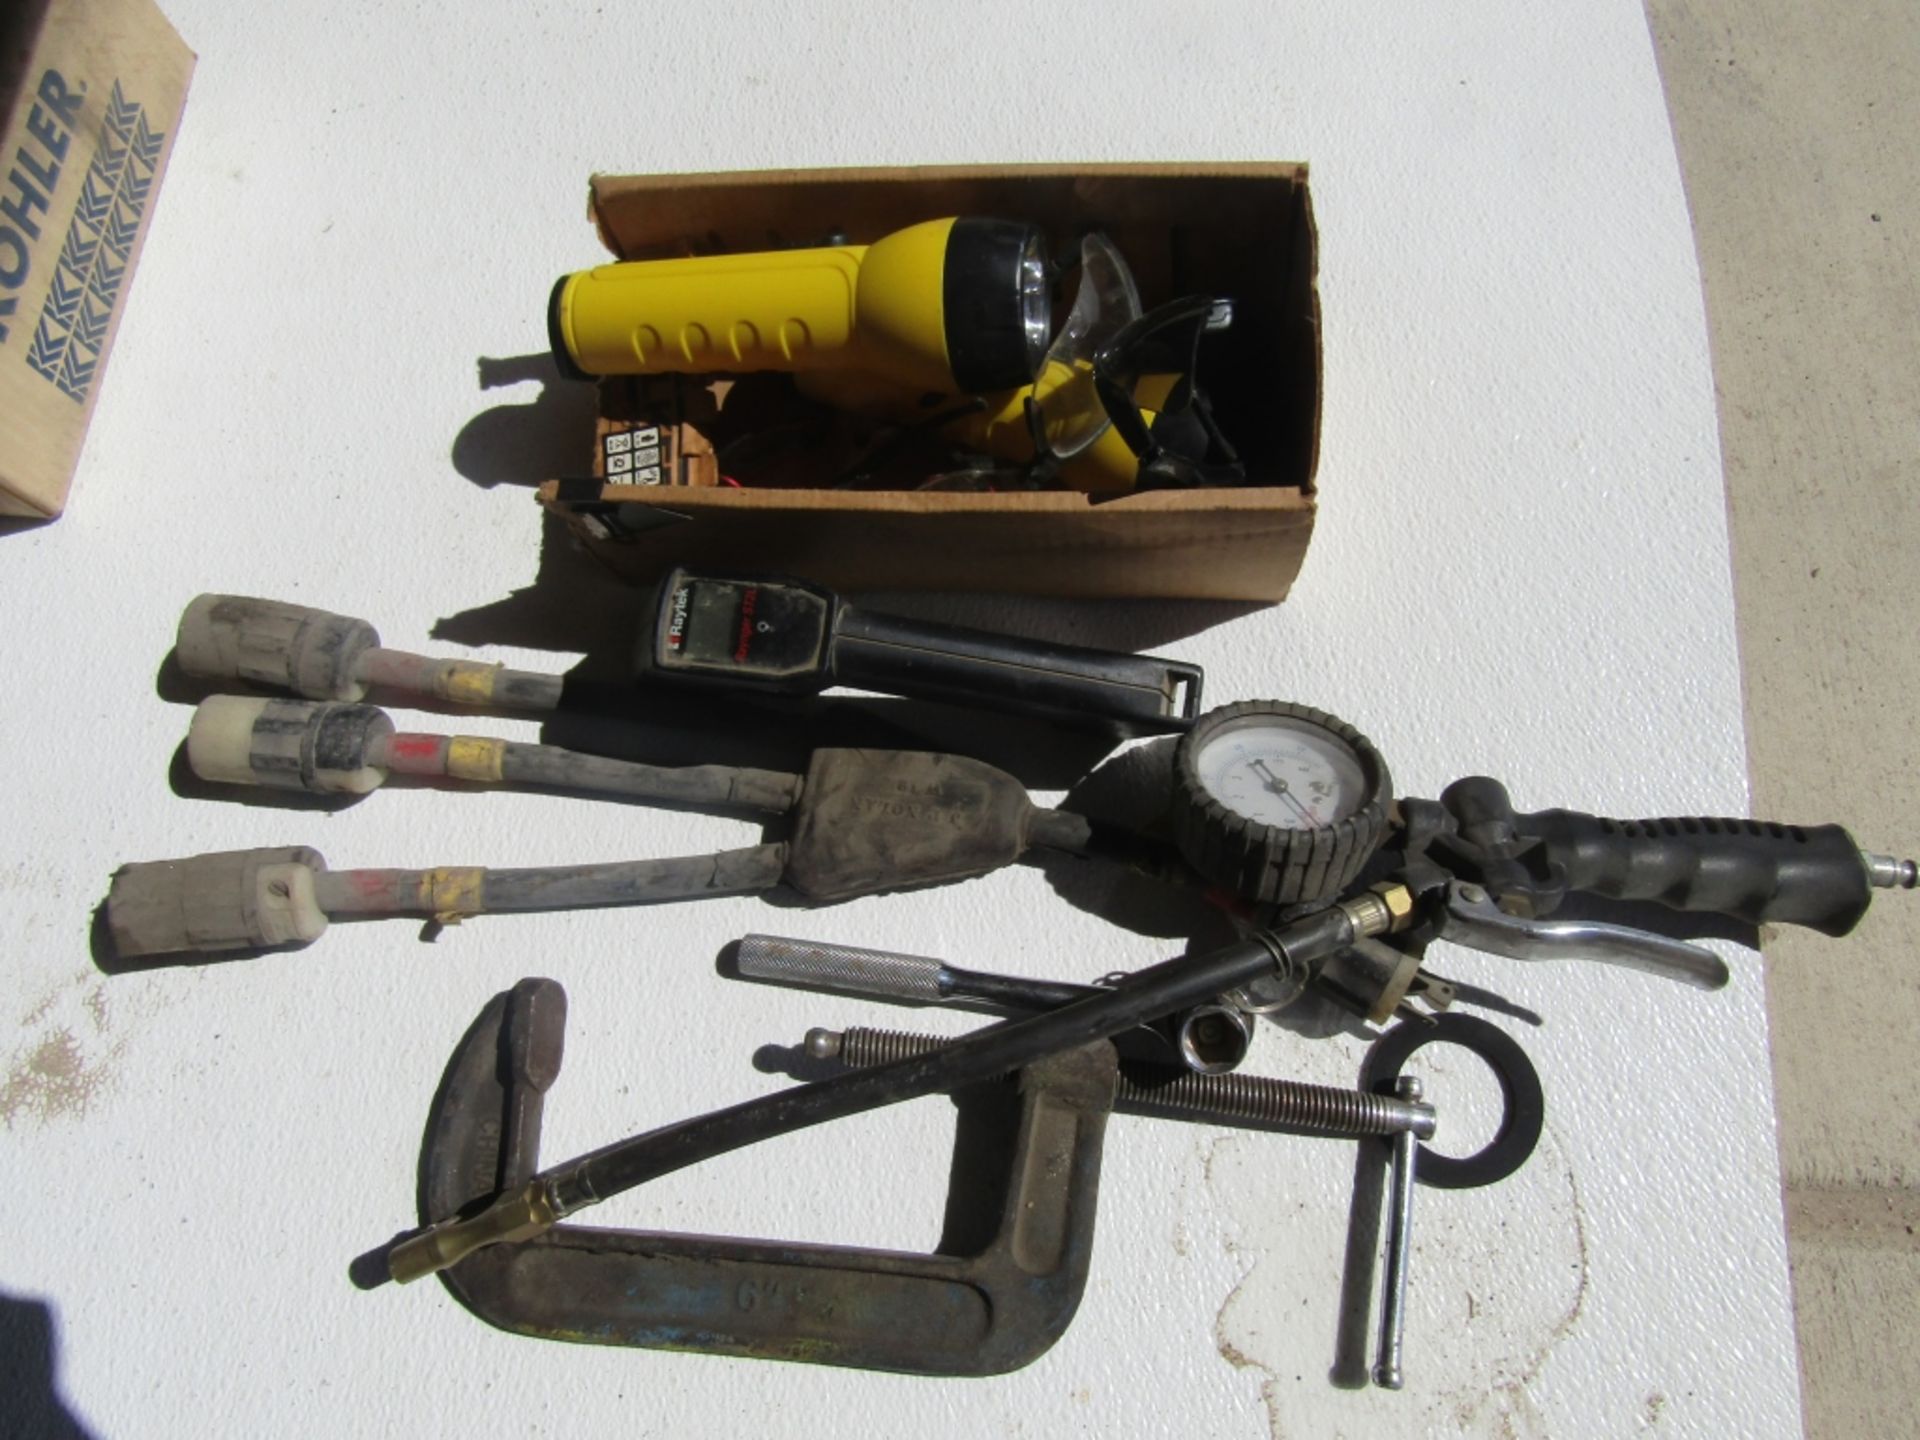 Miscellaneous Tools, C Clamps, Pigtail Tester, Flashlight,